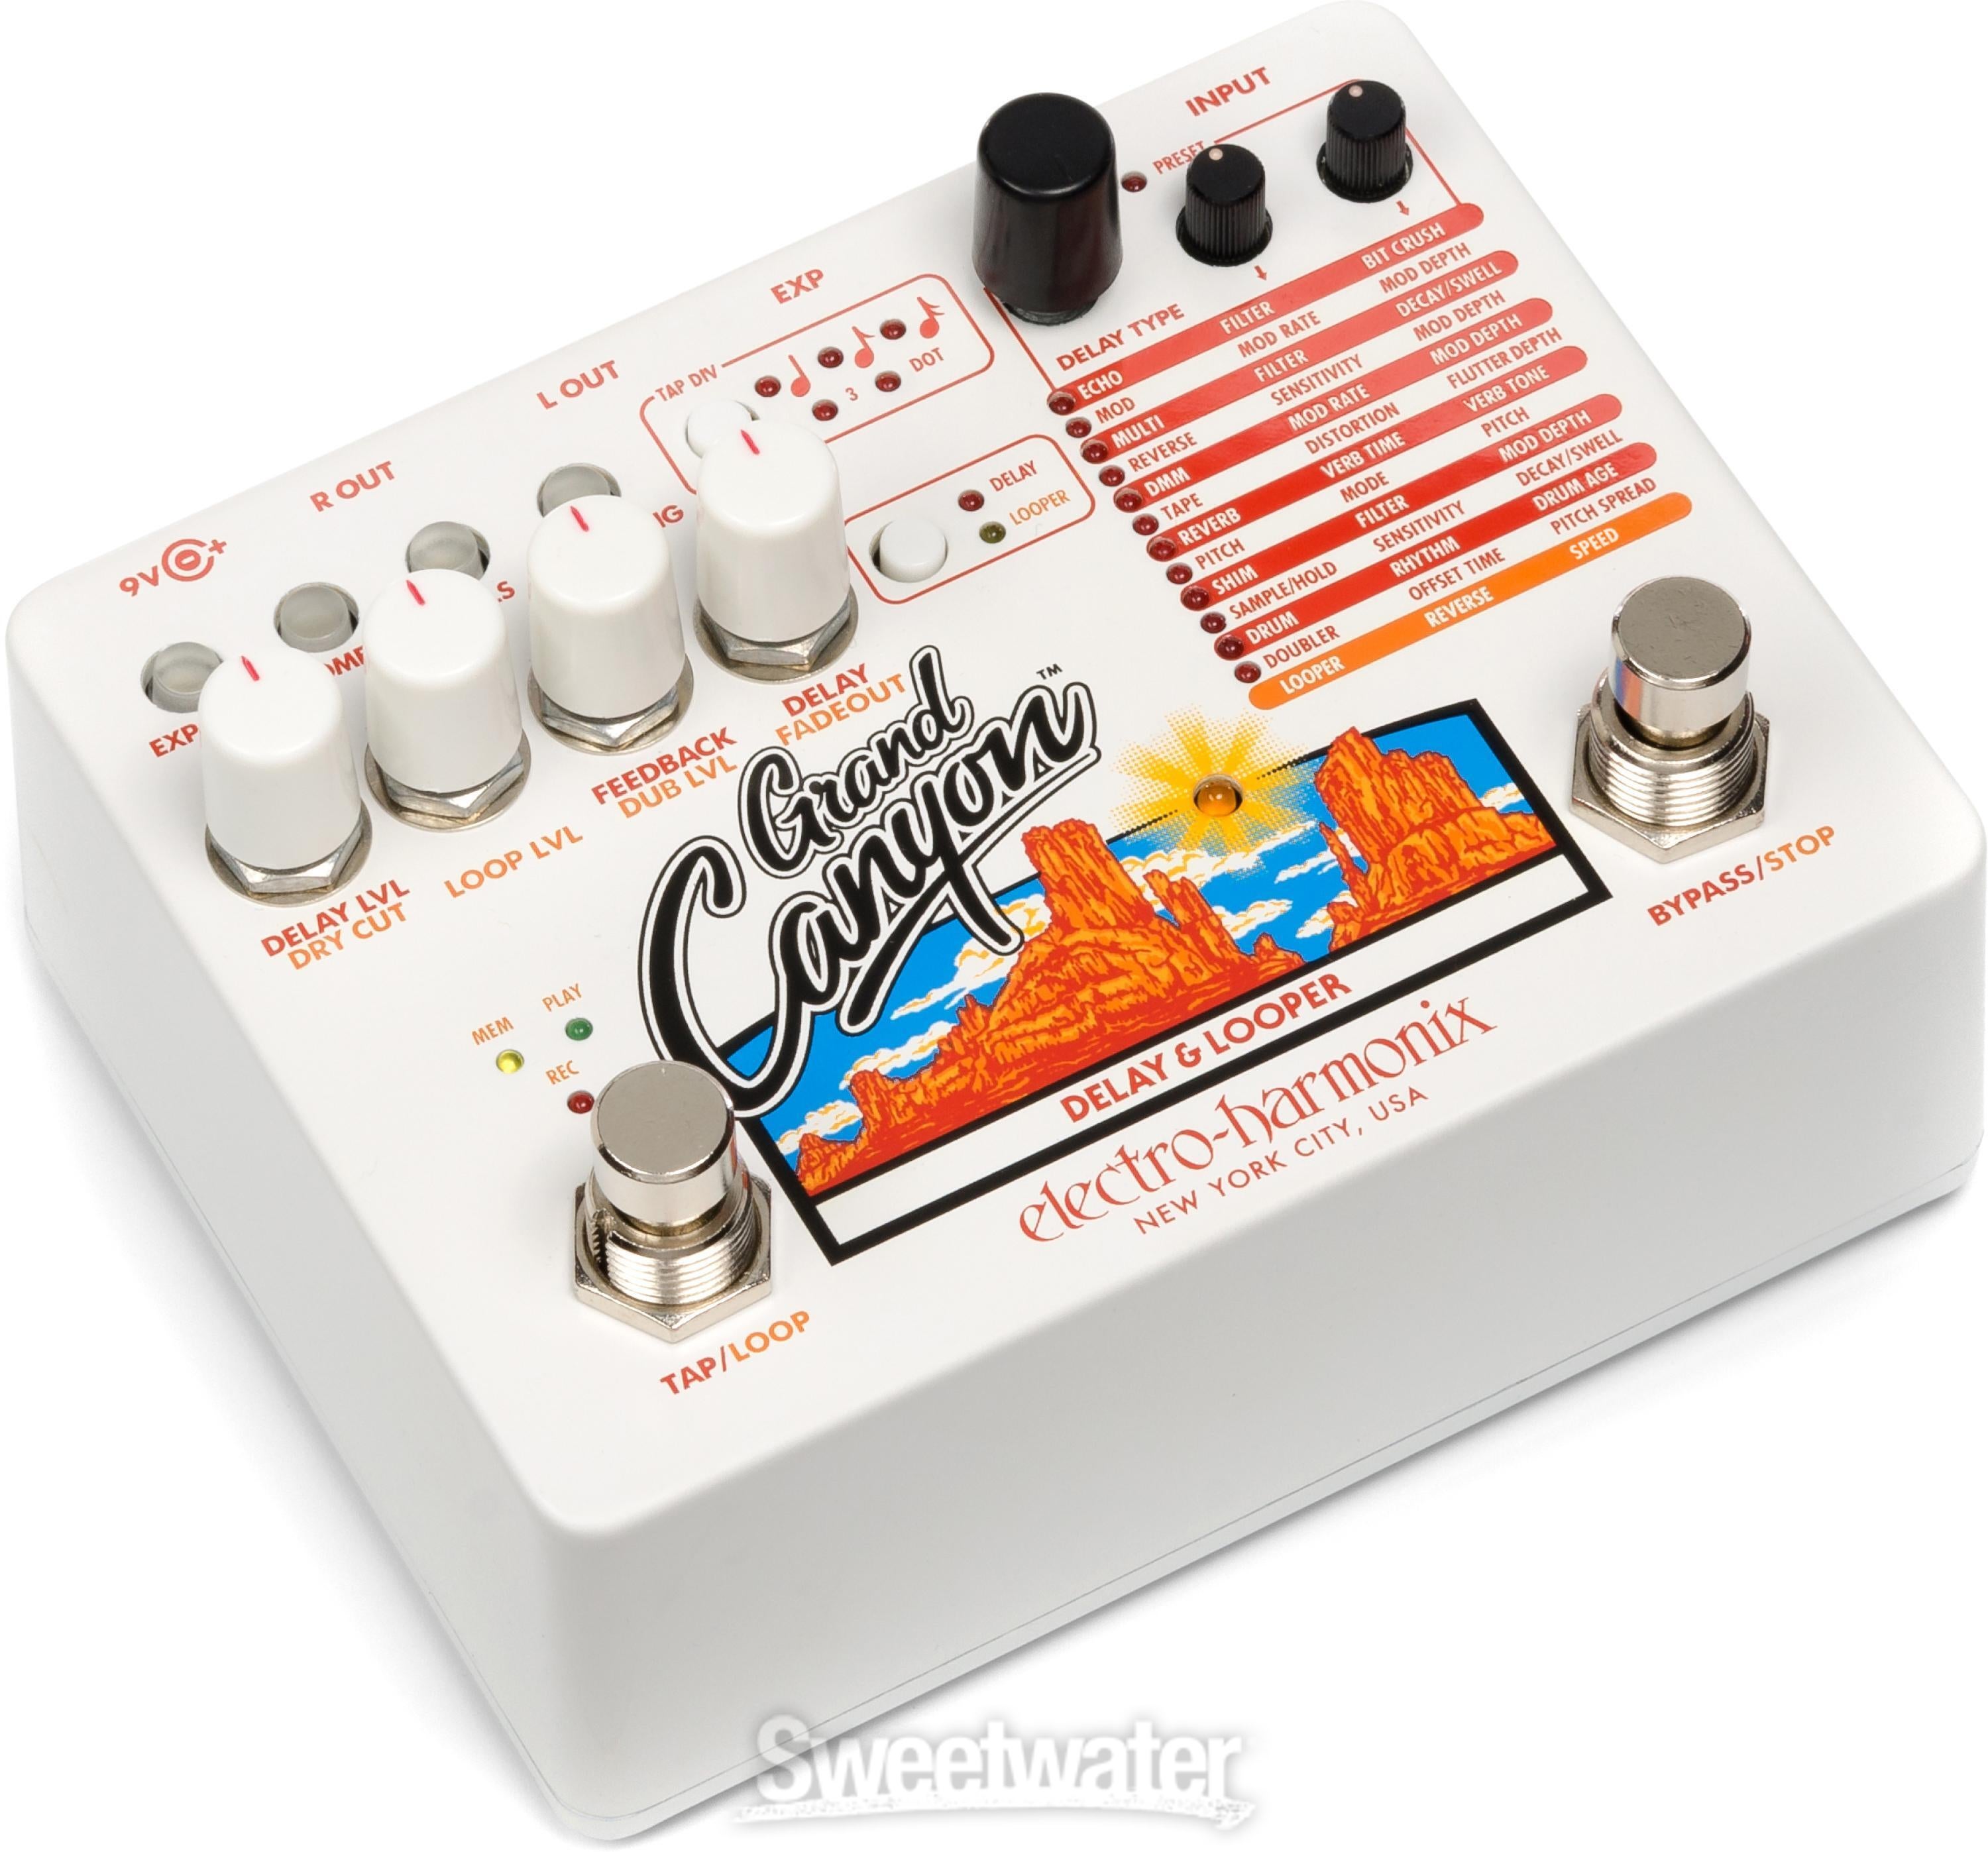 Electro-Harmonix Grand Canyon Delay & Looper Pedal | Sweetwater